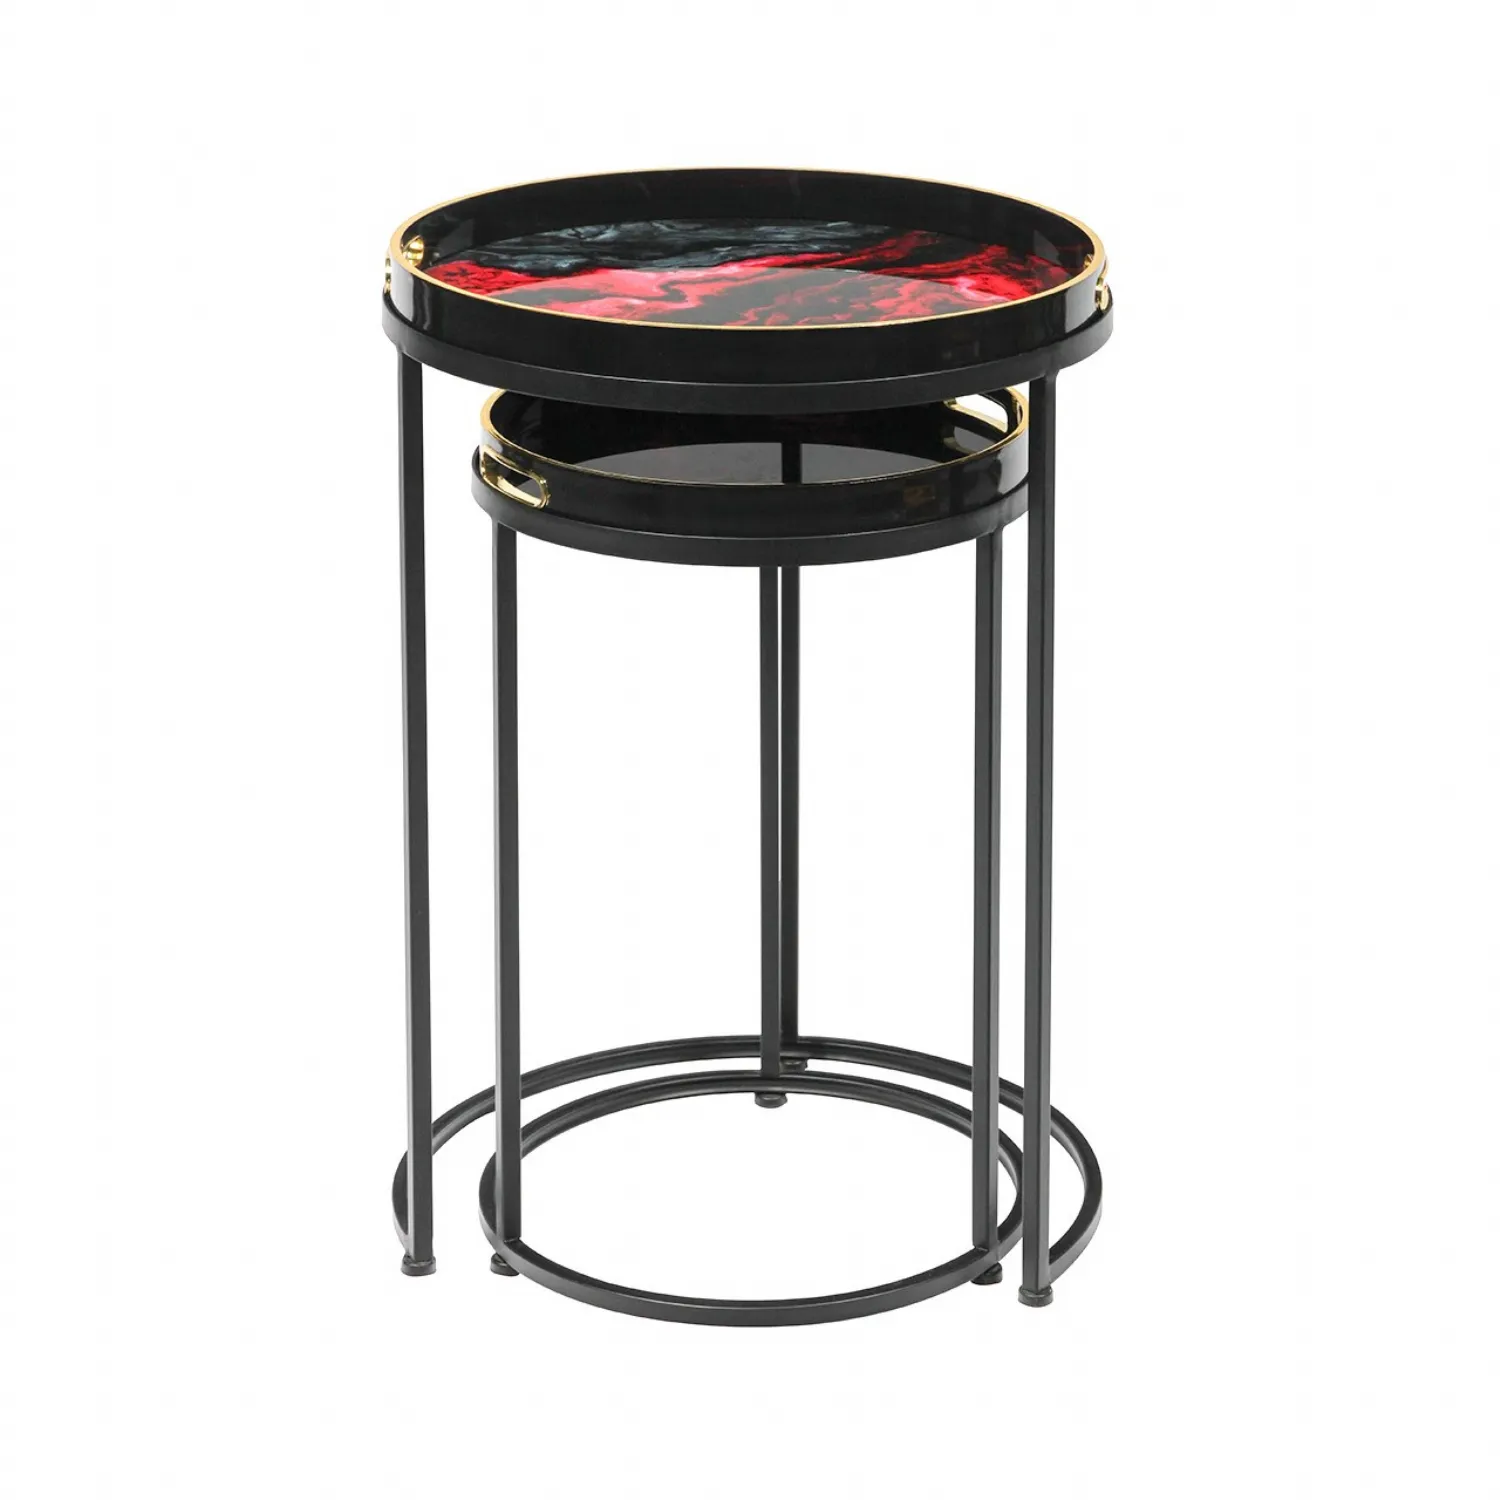 Olin Set Of 2 Red And Black Nesting Tables